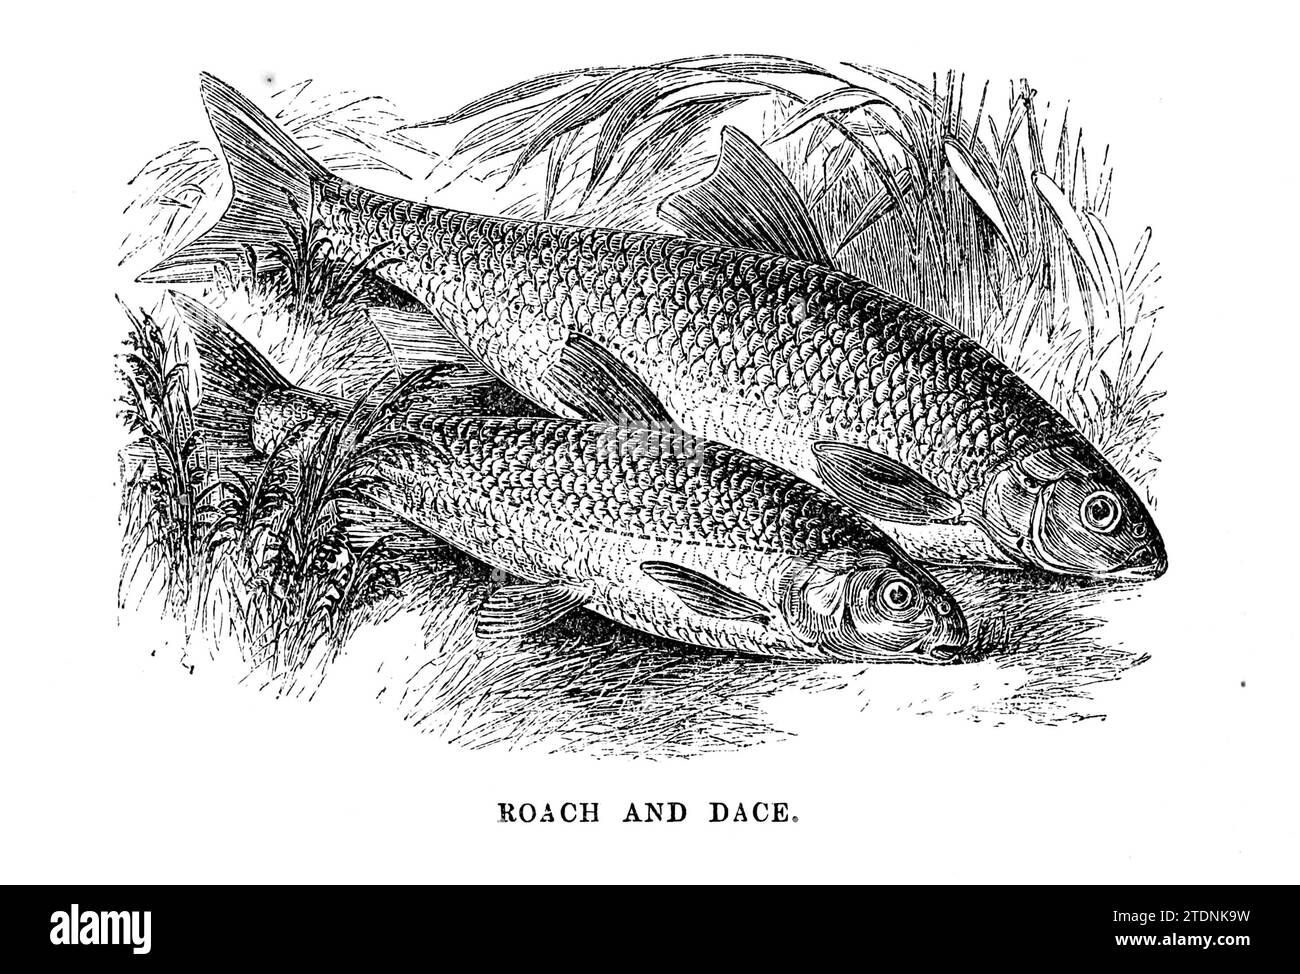 Roach and Dace from the book The Severn valley: a series of sketches, descriptive and pictorial, of the course of the Severn: containing notices of its topographical, industrial, and geological features; with glances at its historical and legendary associations by Randall, John, 1810-1910 Publication date 1862 Publisher J. S. Virtue Stock Photo